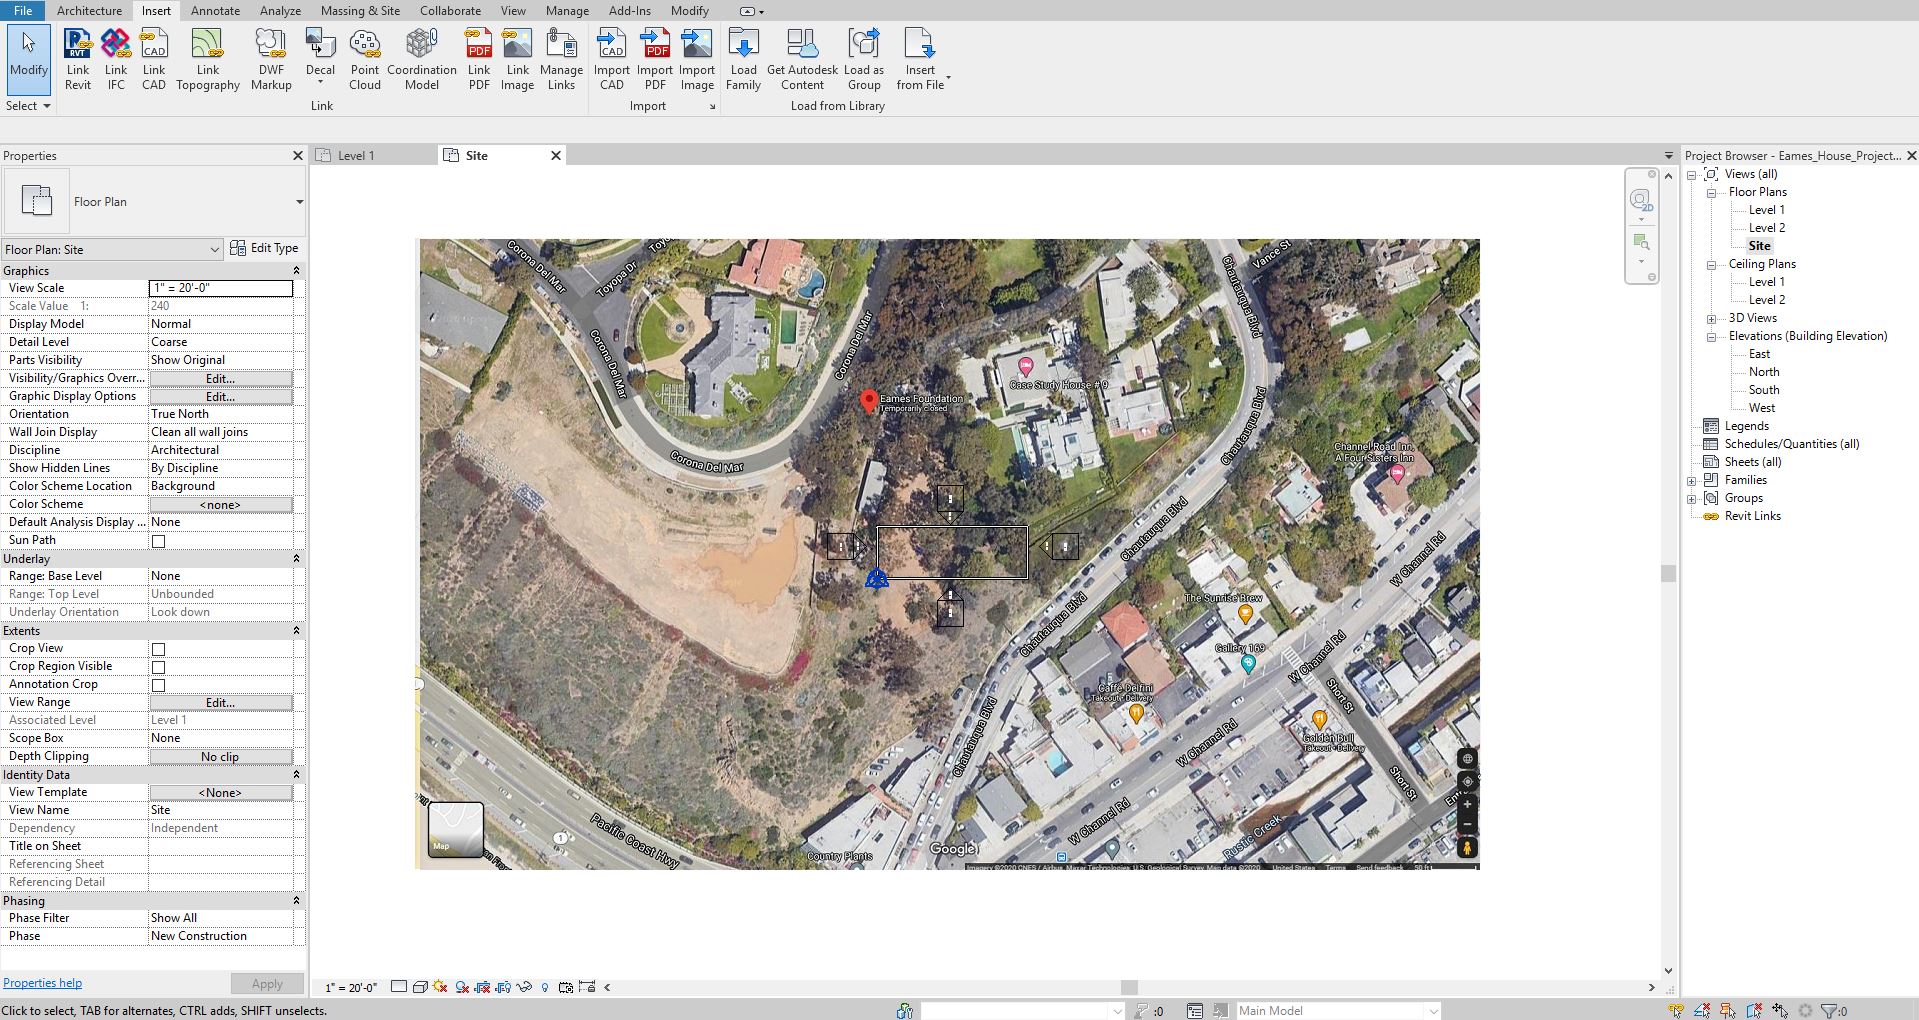 It shows the screen shot that the google map image was added.